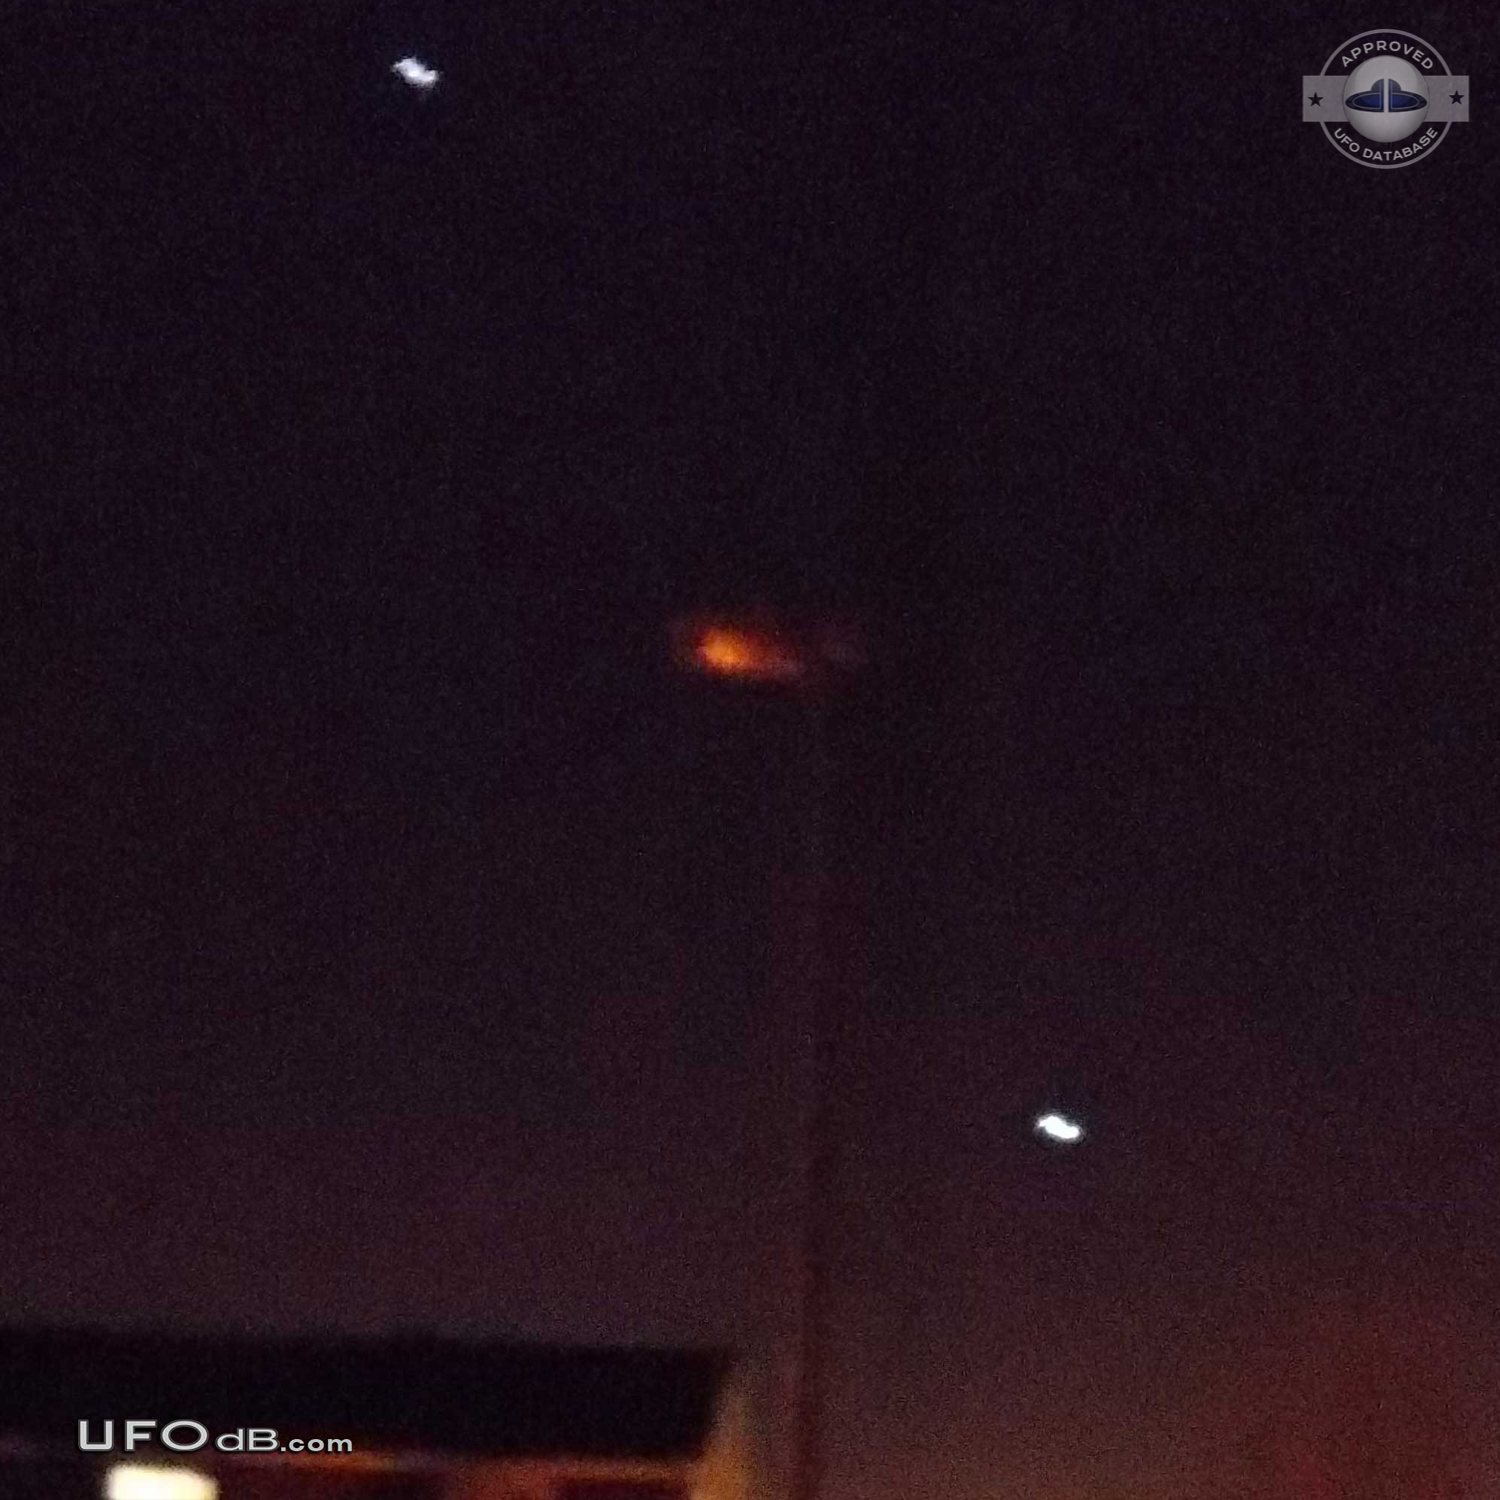 Silent UFOs - One red and two white seen on a clear night - UK 2012 UFO Picture #418-1